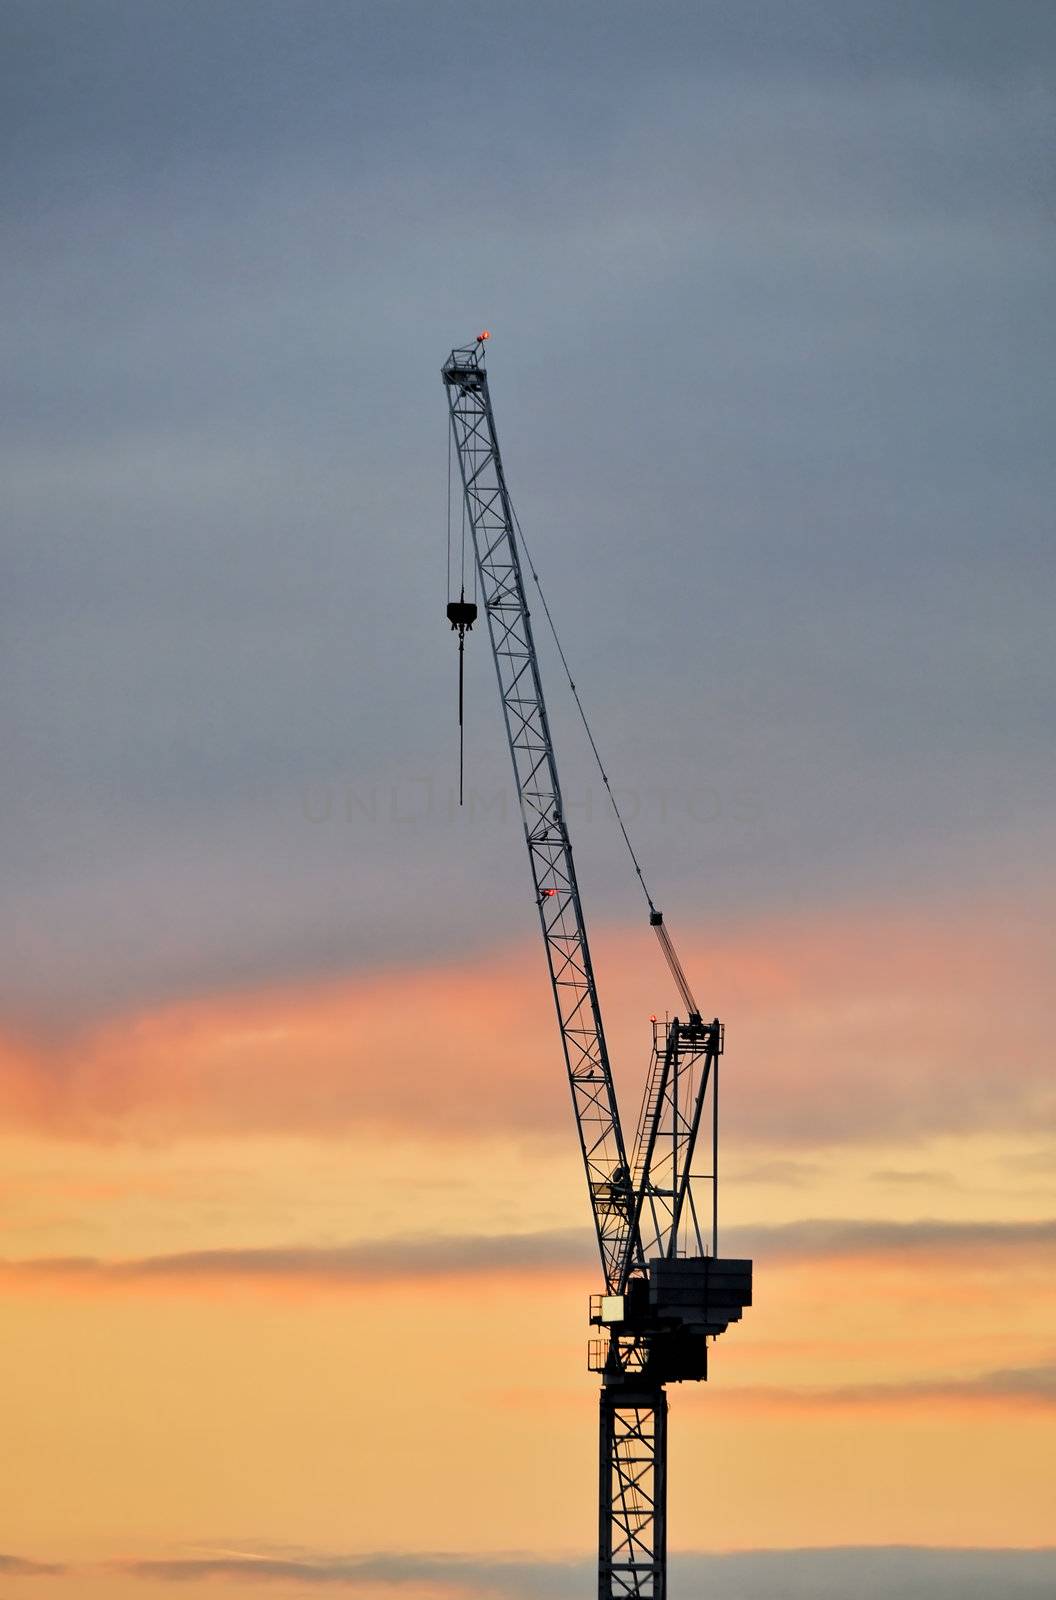 A crane silhouette at sunset